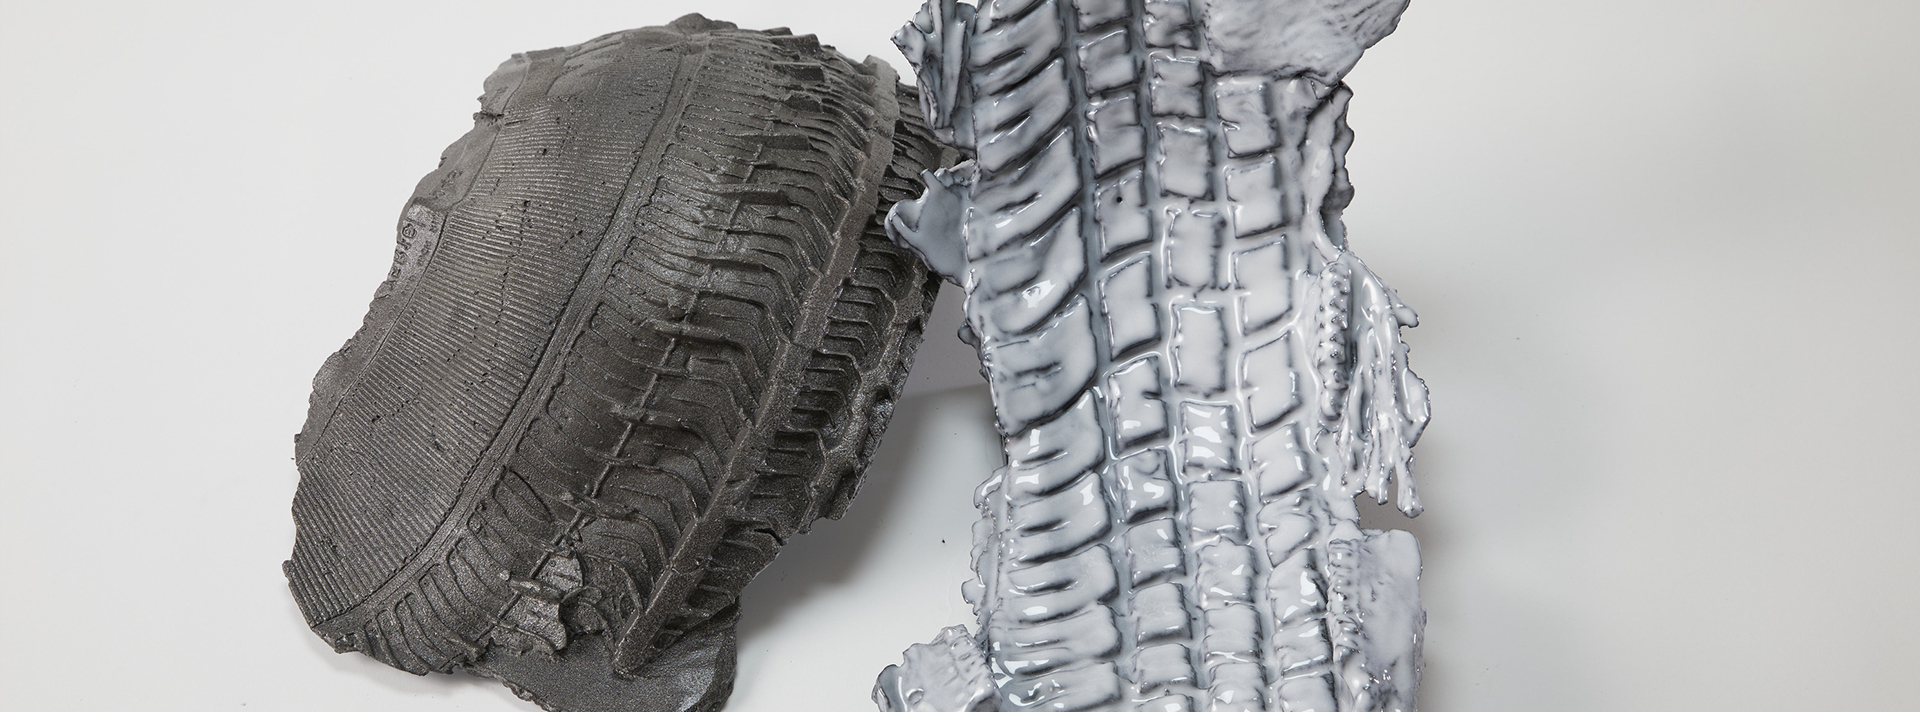 Header Lee Emma Running Project two slices of tire tread on a white background the right one has a thick white paste on it jpg